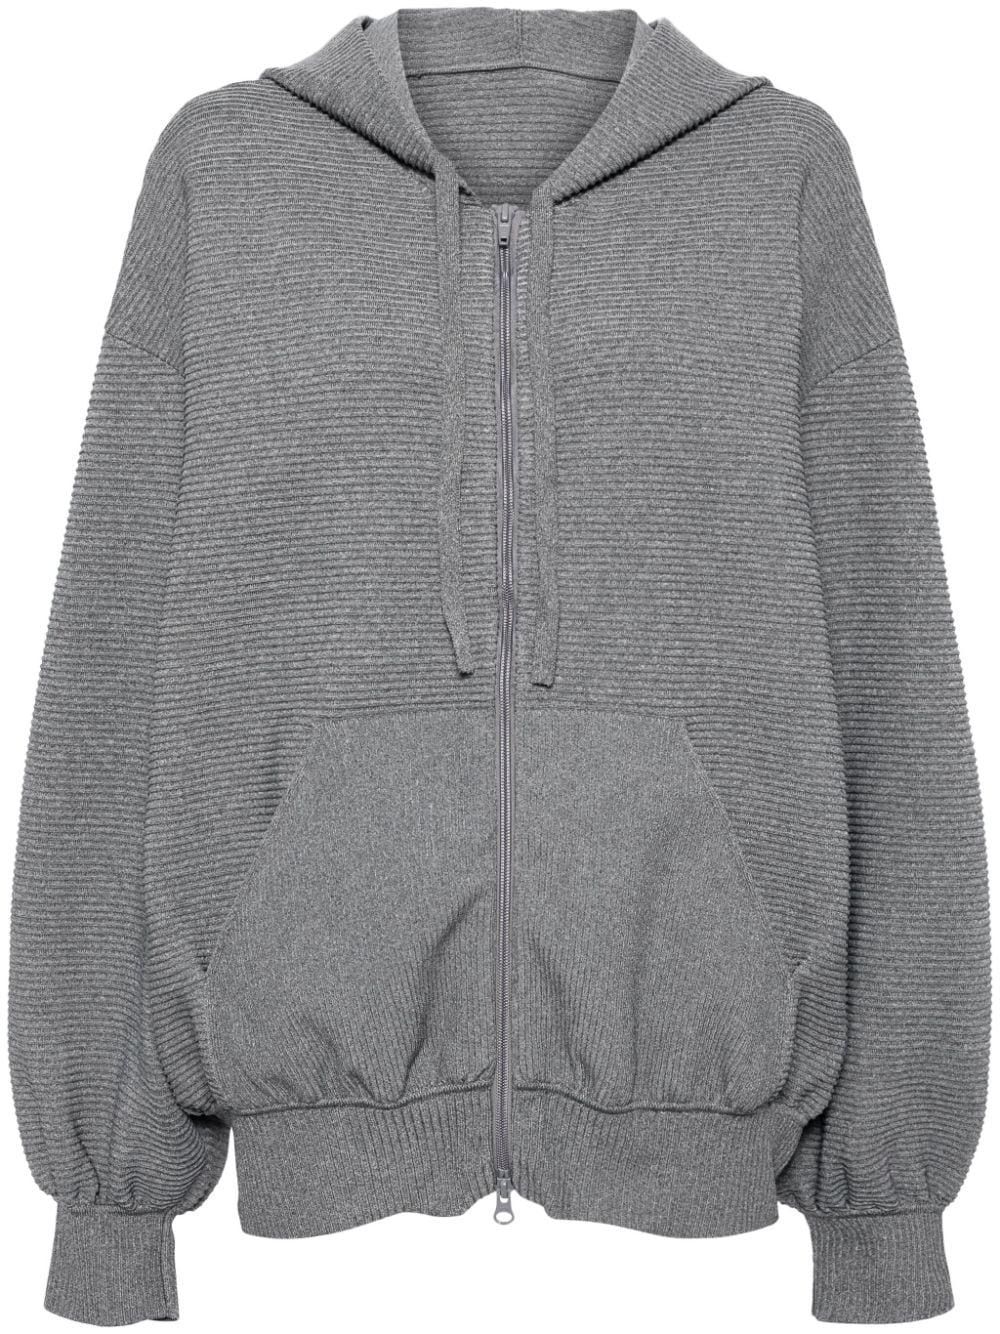 JNBY knitted hooded cardigan - Grey von JNBY